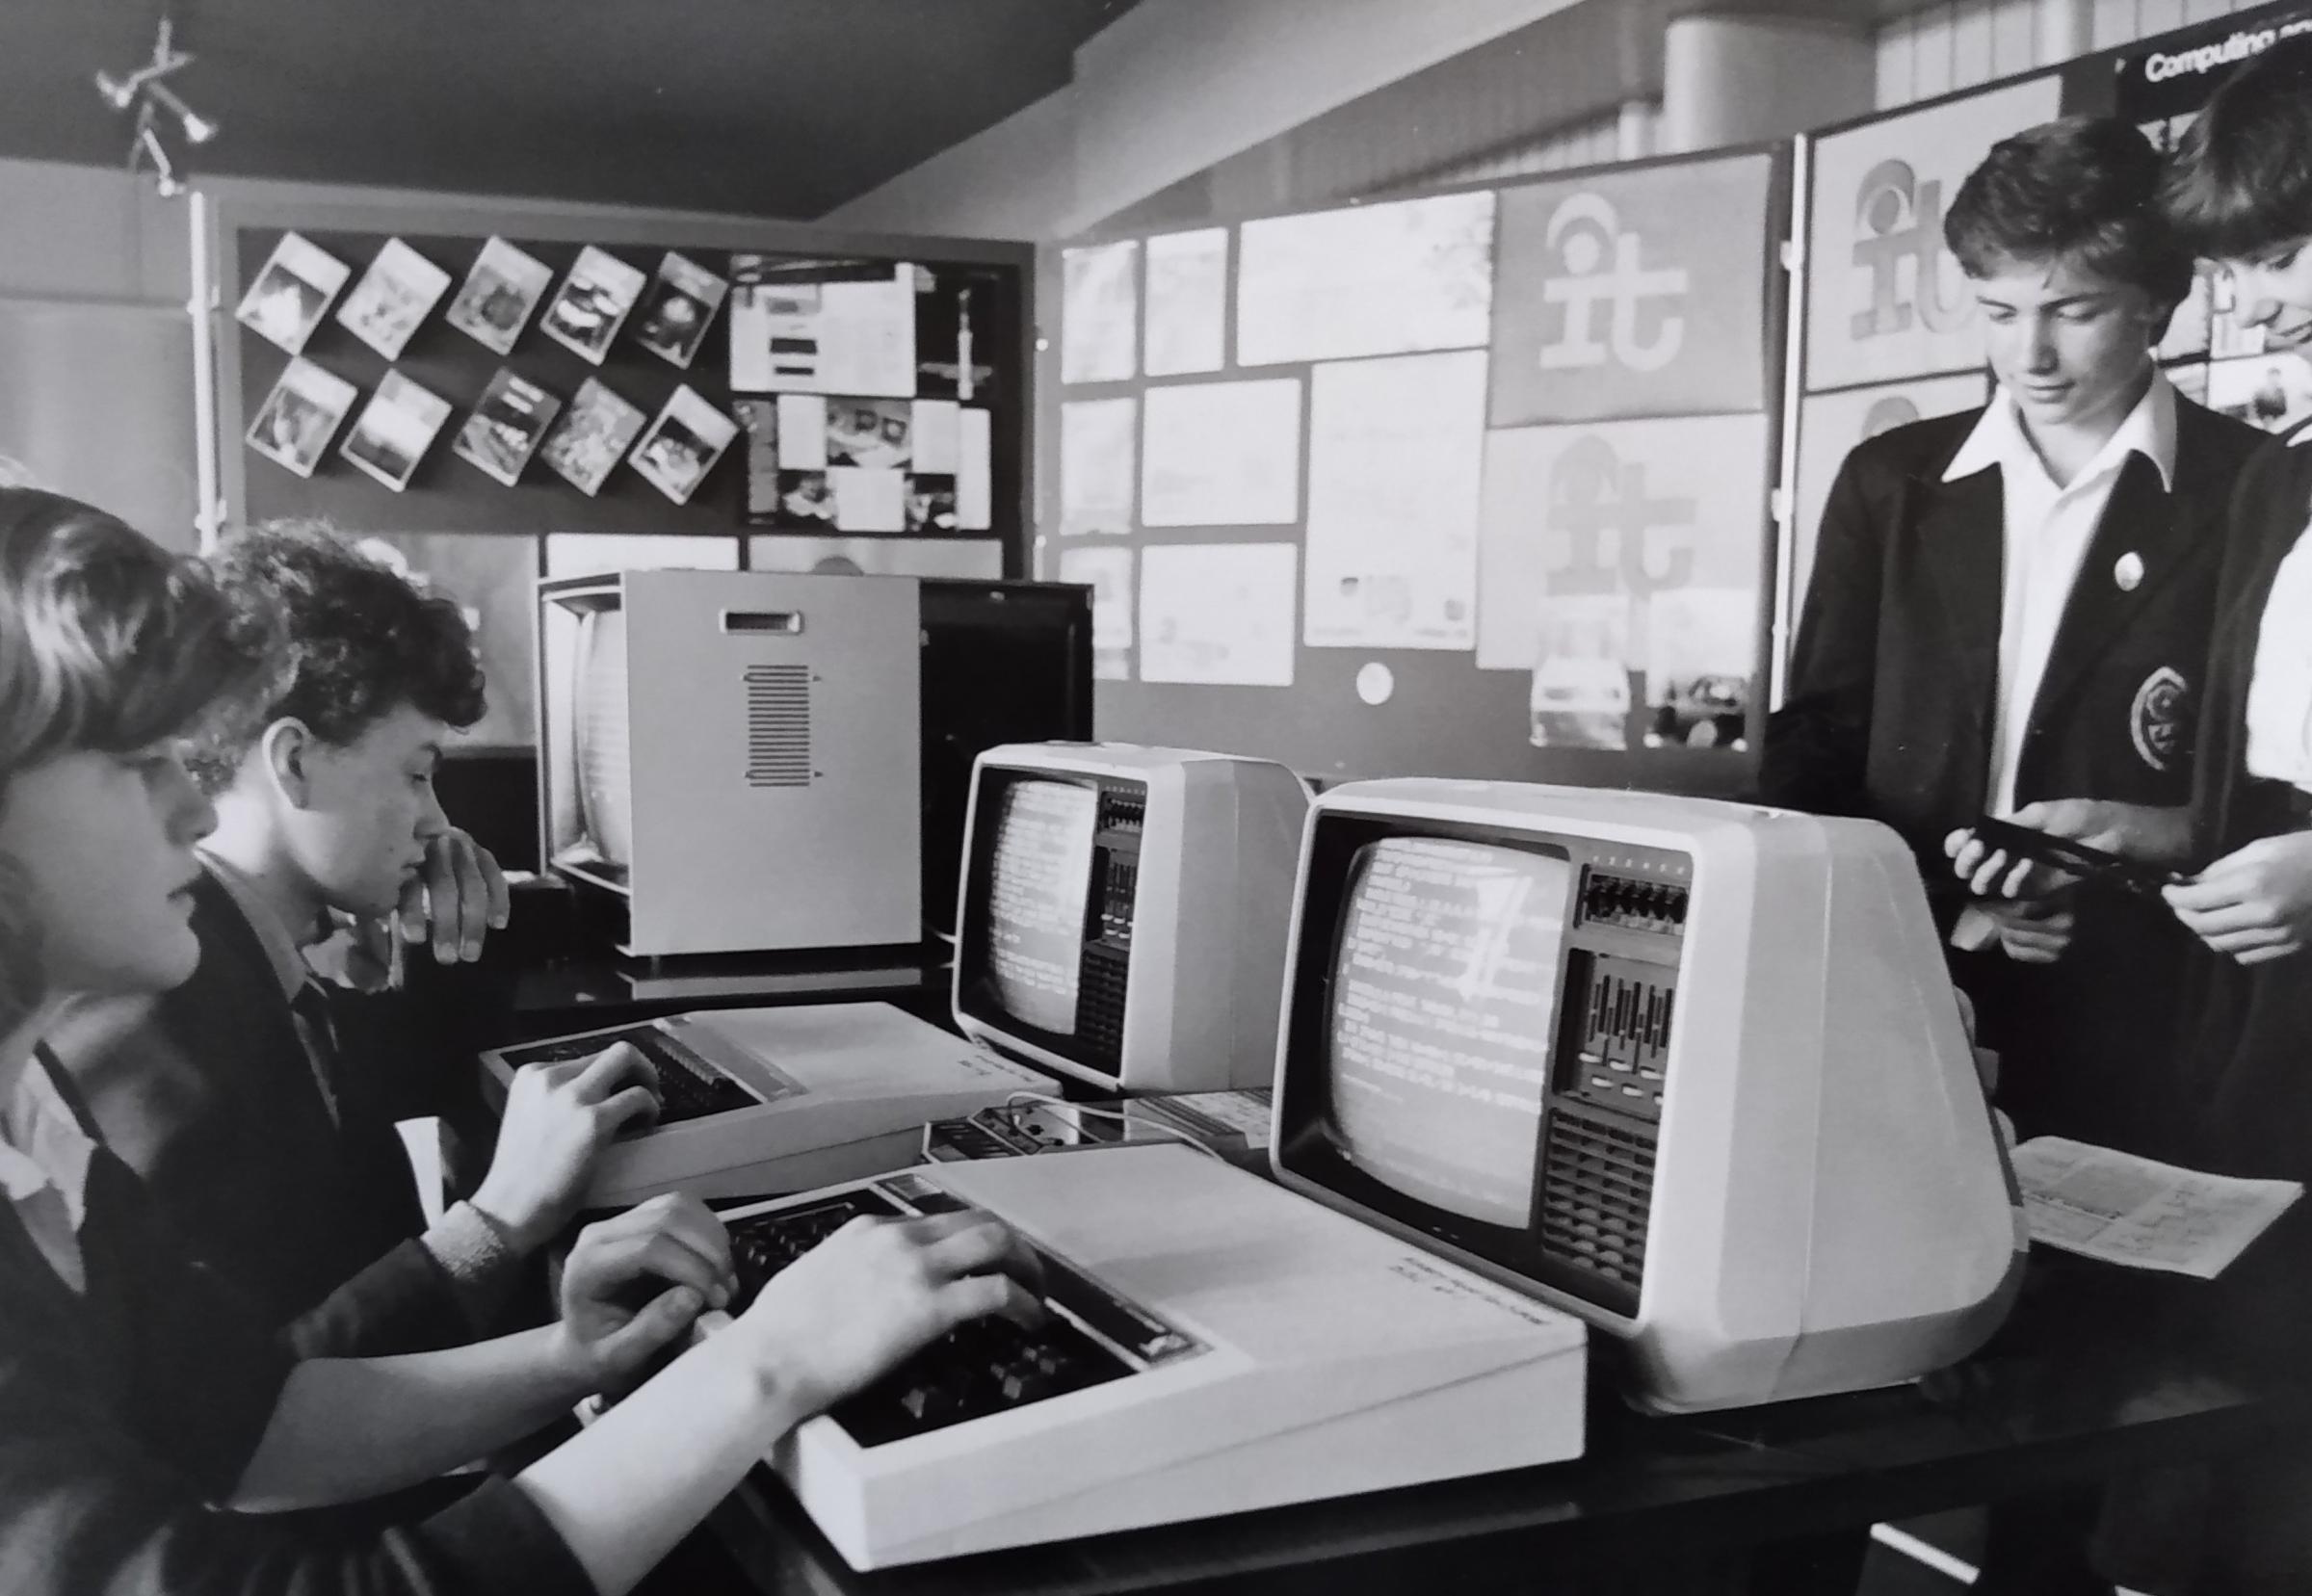 Back to June 1982 and pupils got to grip with the schools new computers. From left, Sarah Tompson, Nicholas Hewston, Richard Cook and Penny Lane